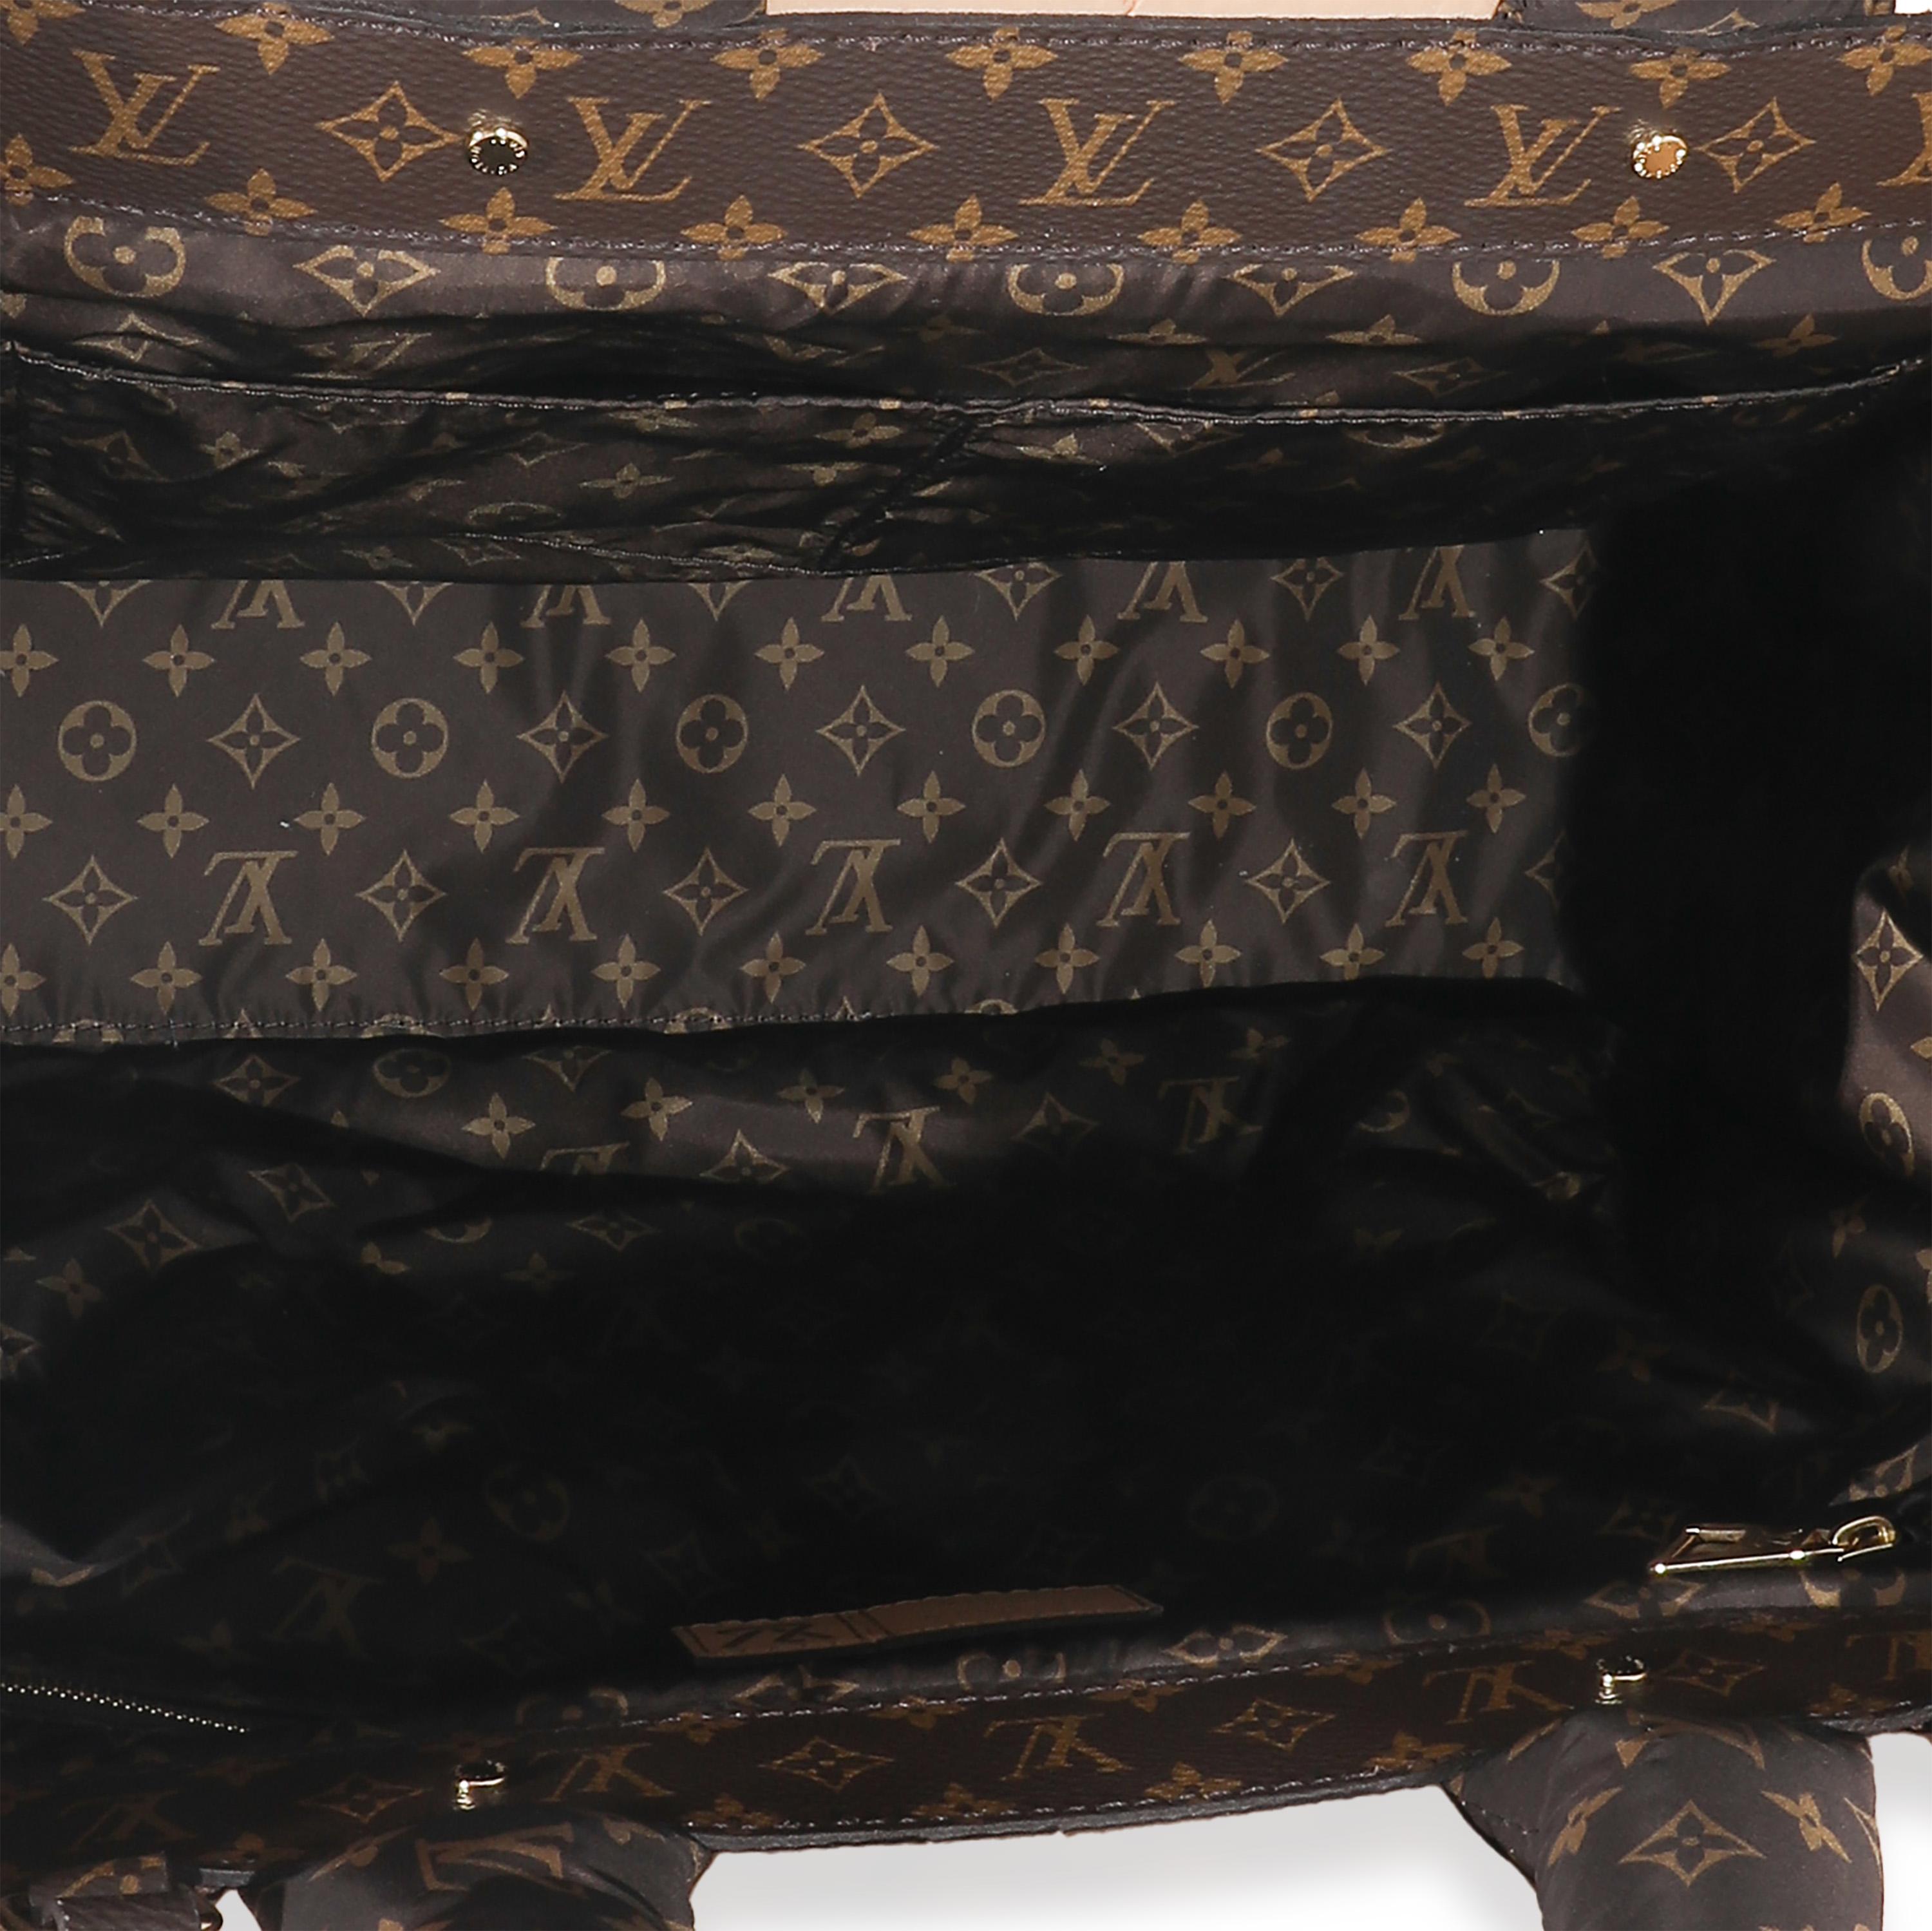 Listing Title: Louis Vuitton Beige Econyl Nylon Monogram Pillow Giant Onthego GM
SKU: 132777
MSRP: 3250.00 USD
Condition: Pre-owned 
Handbag Condition: Excellent
Condition Comments: Item is in excellent condition and displays light signs of